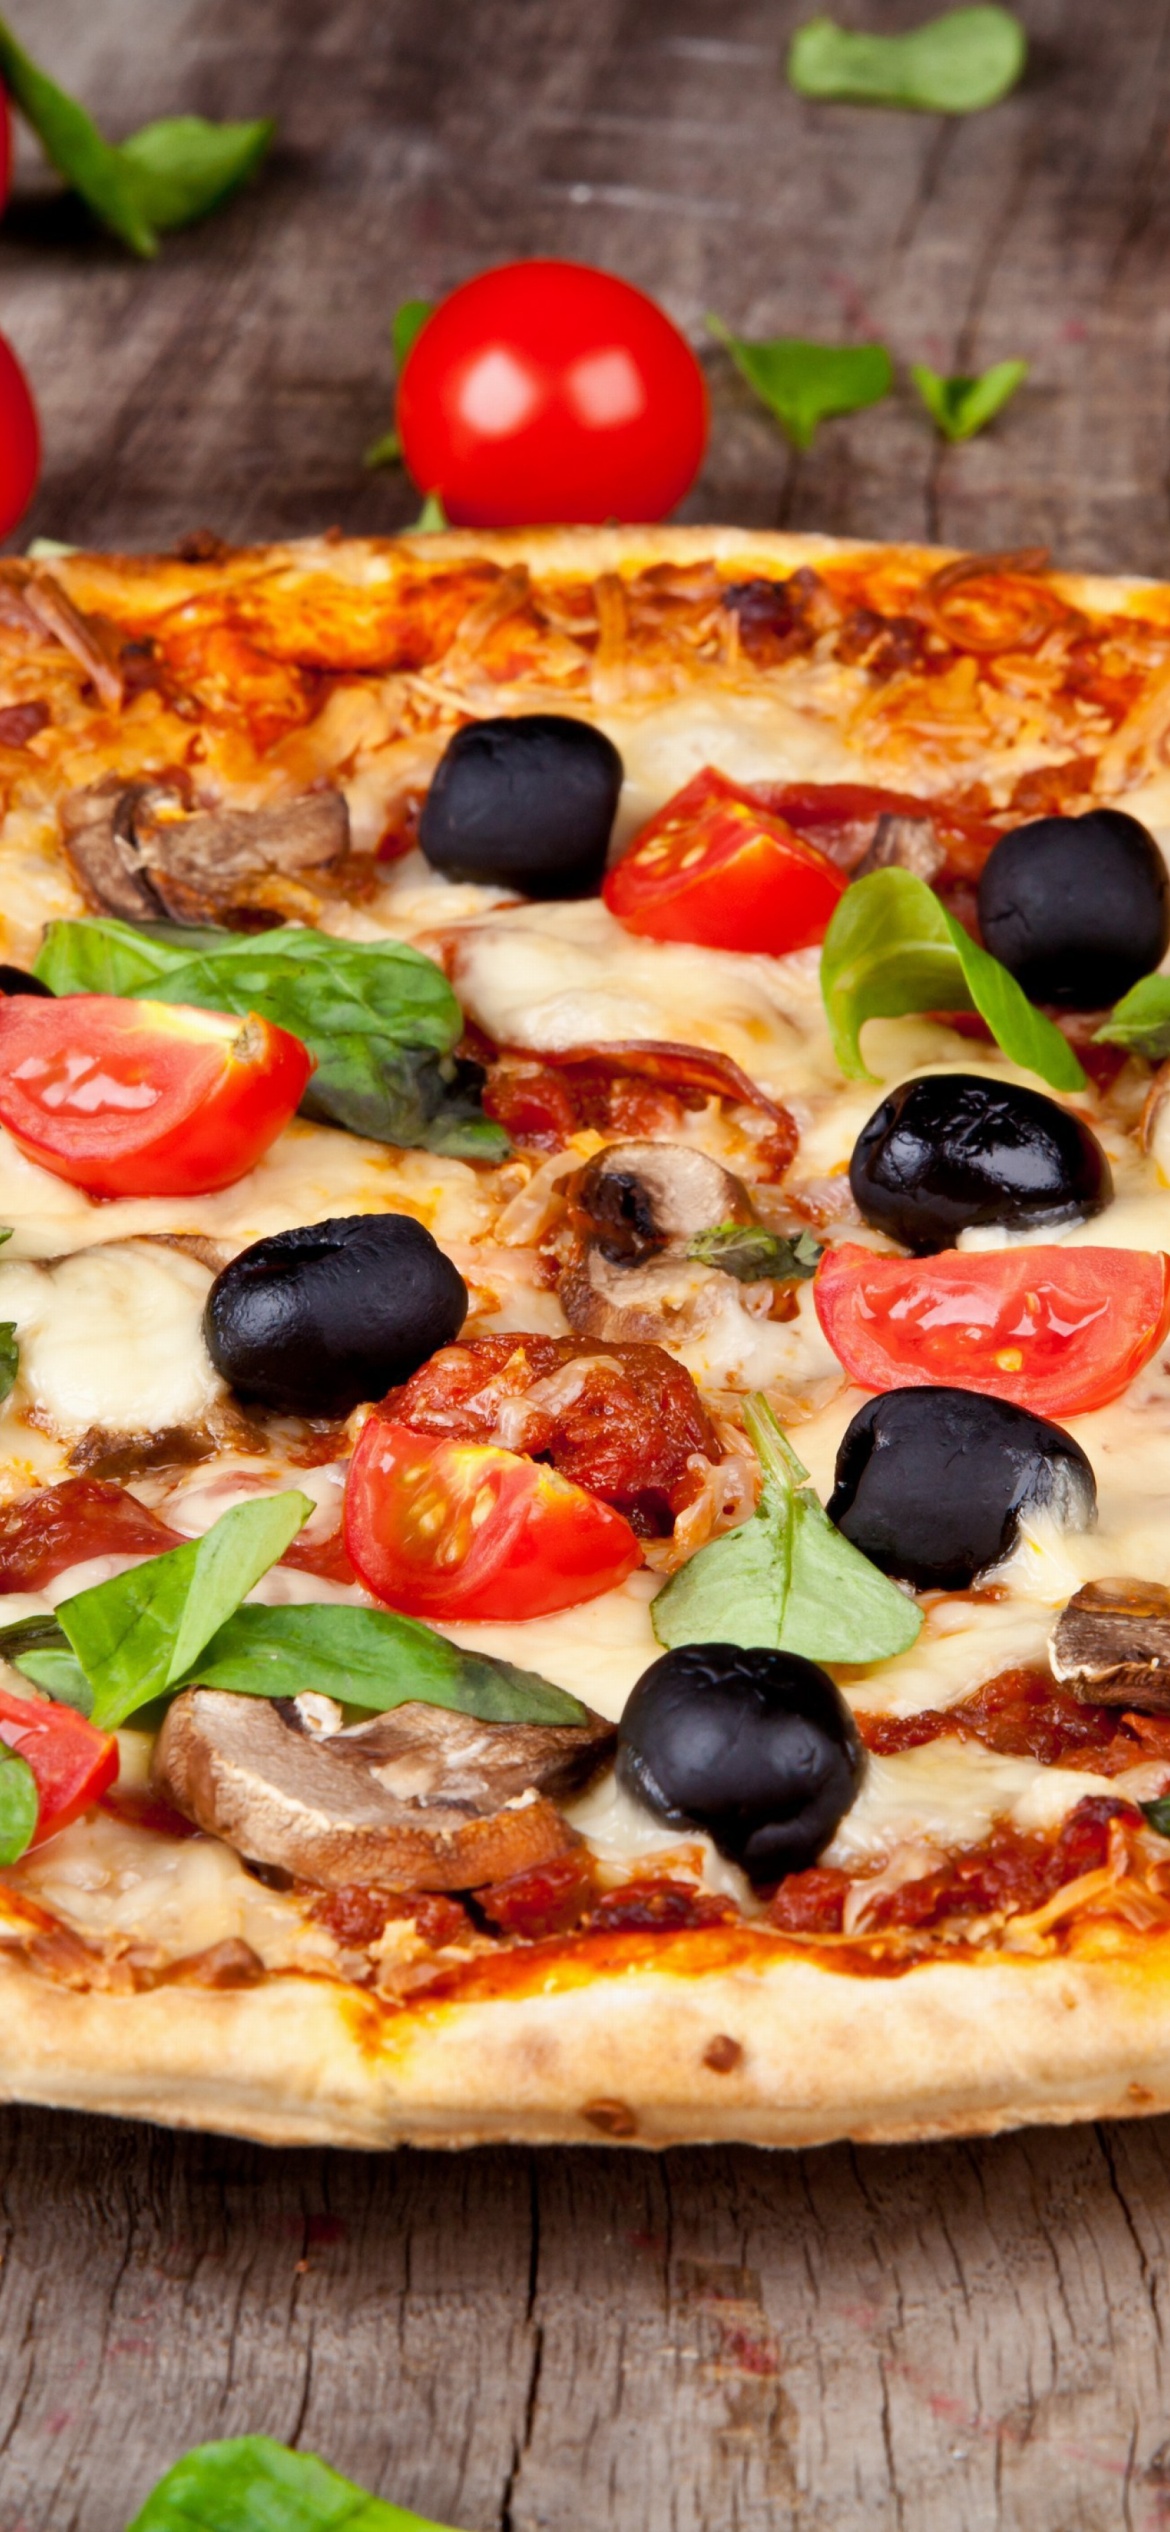 Das Pizza with tomatoes and olives Wallpaper 1170x2532